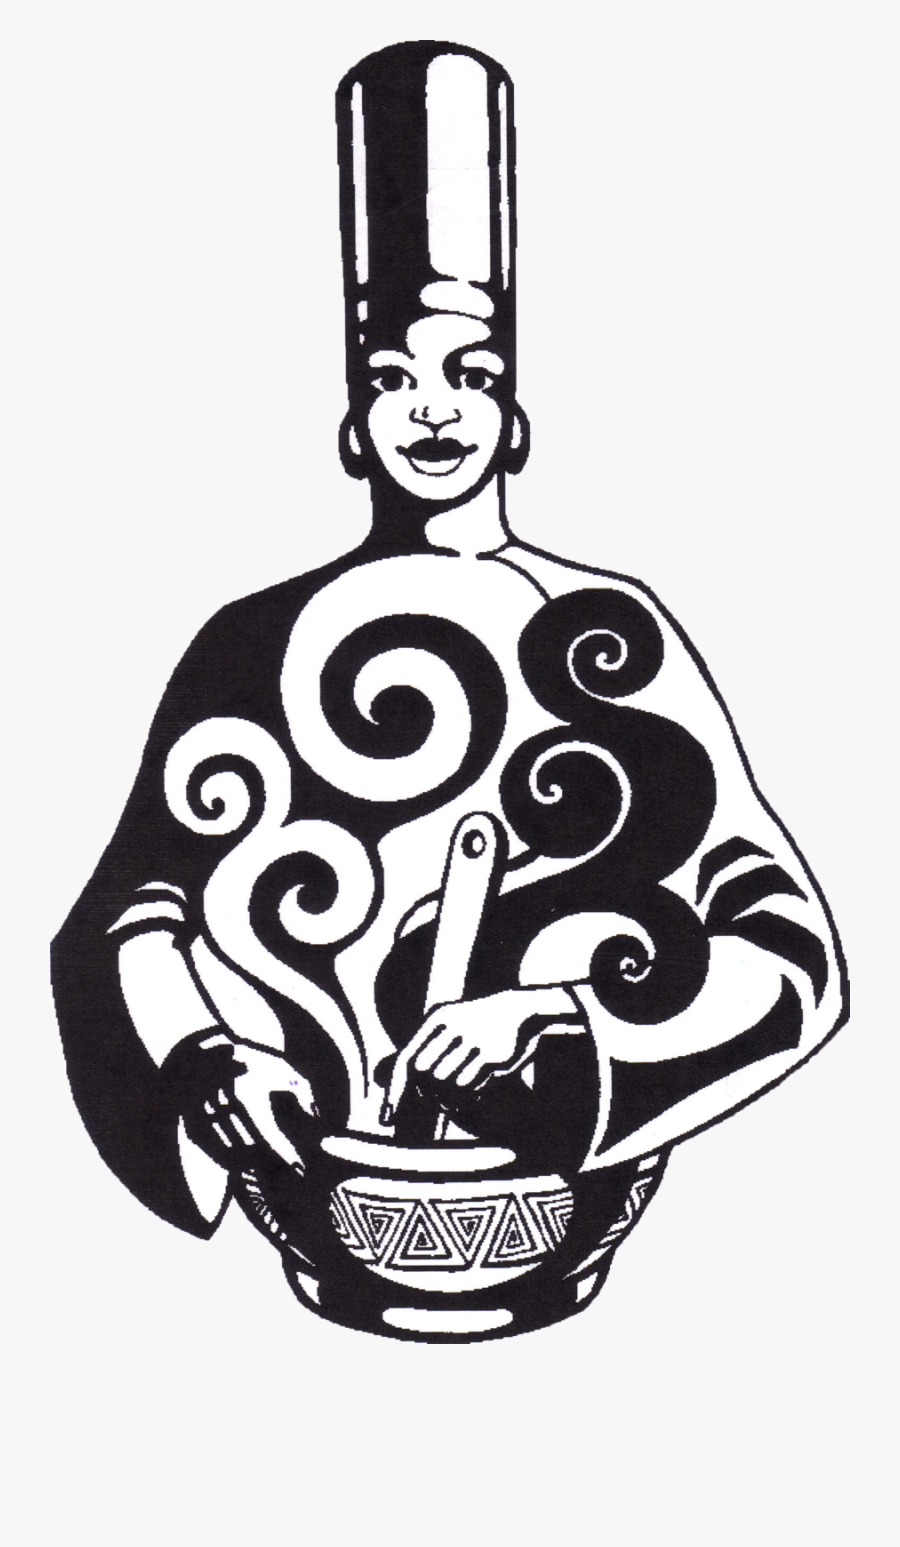 Brooklyn Catering Company - Illustration, Transparent Clipart